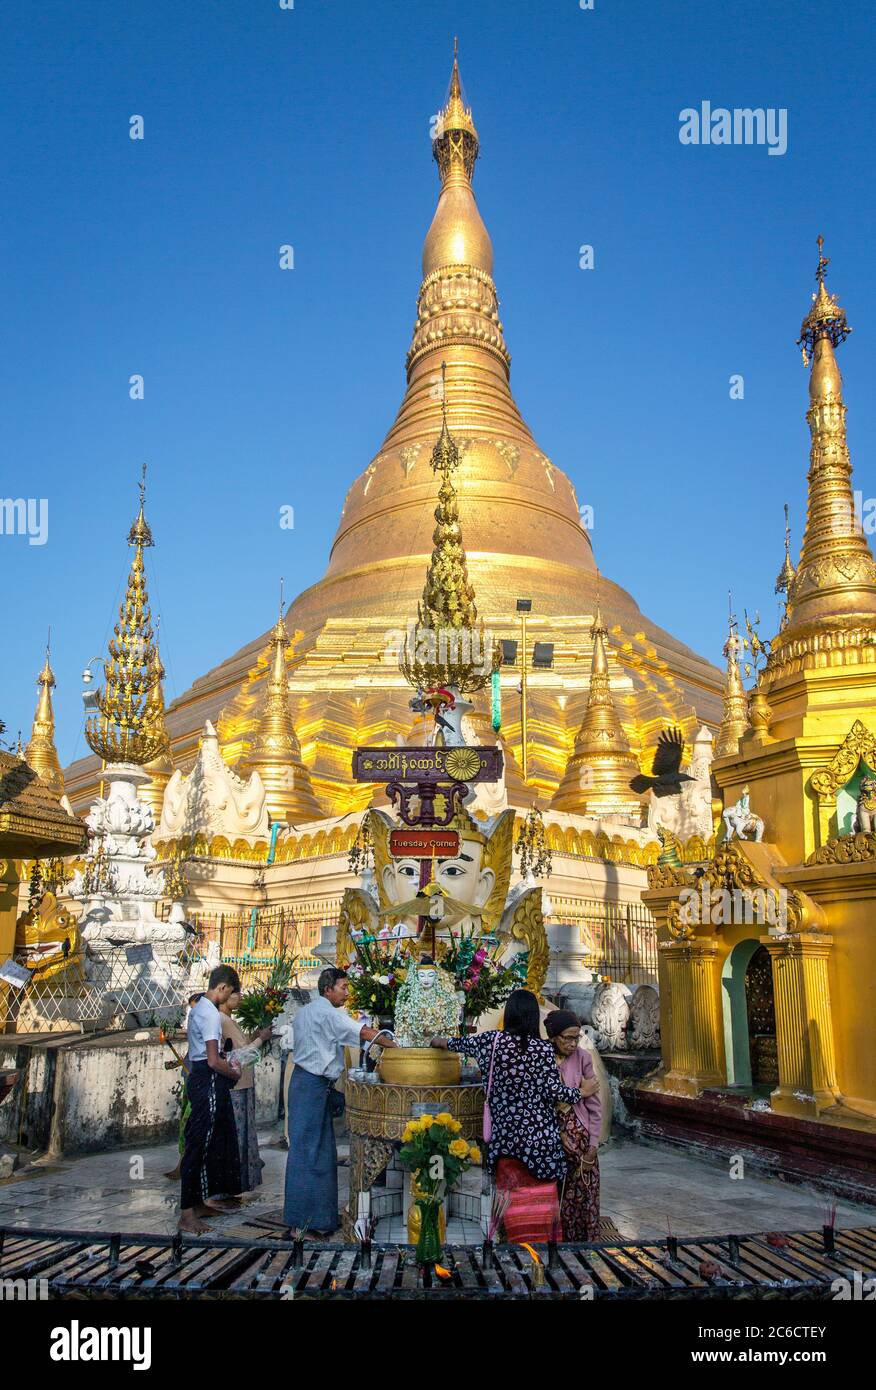 Believers participate in the ceremonial washing of the Nats at the Shwedagon Pagoda in Yangoon, Myanmar Stock Photo